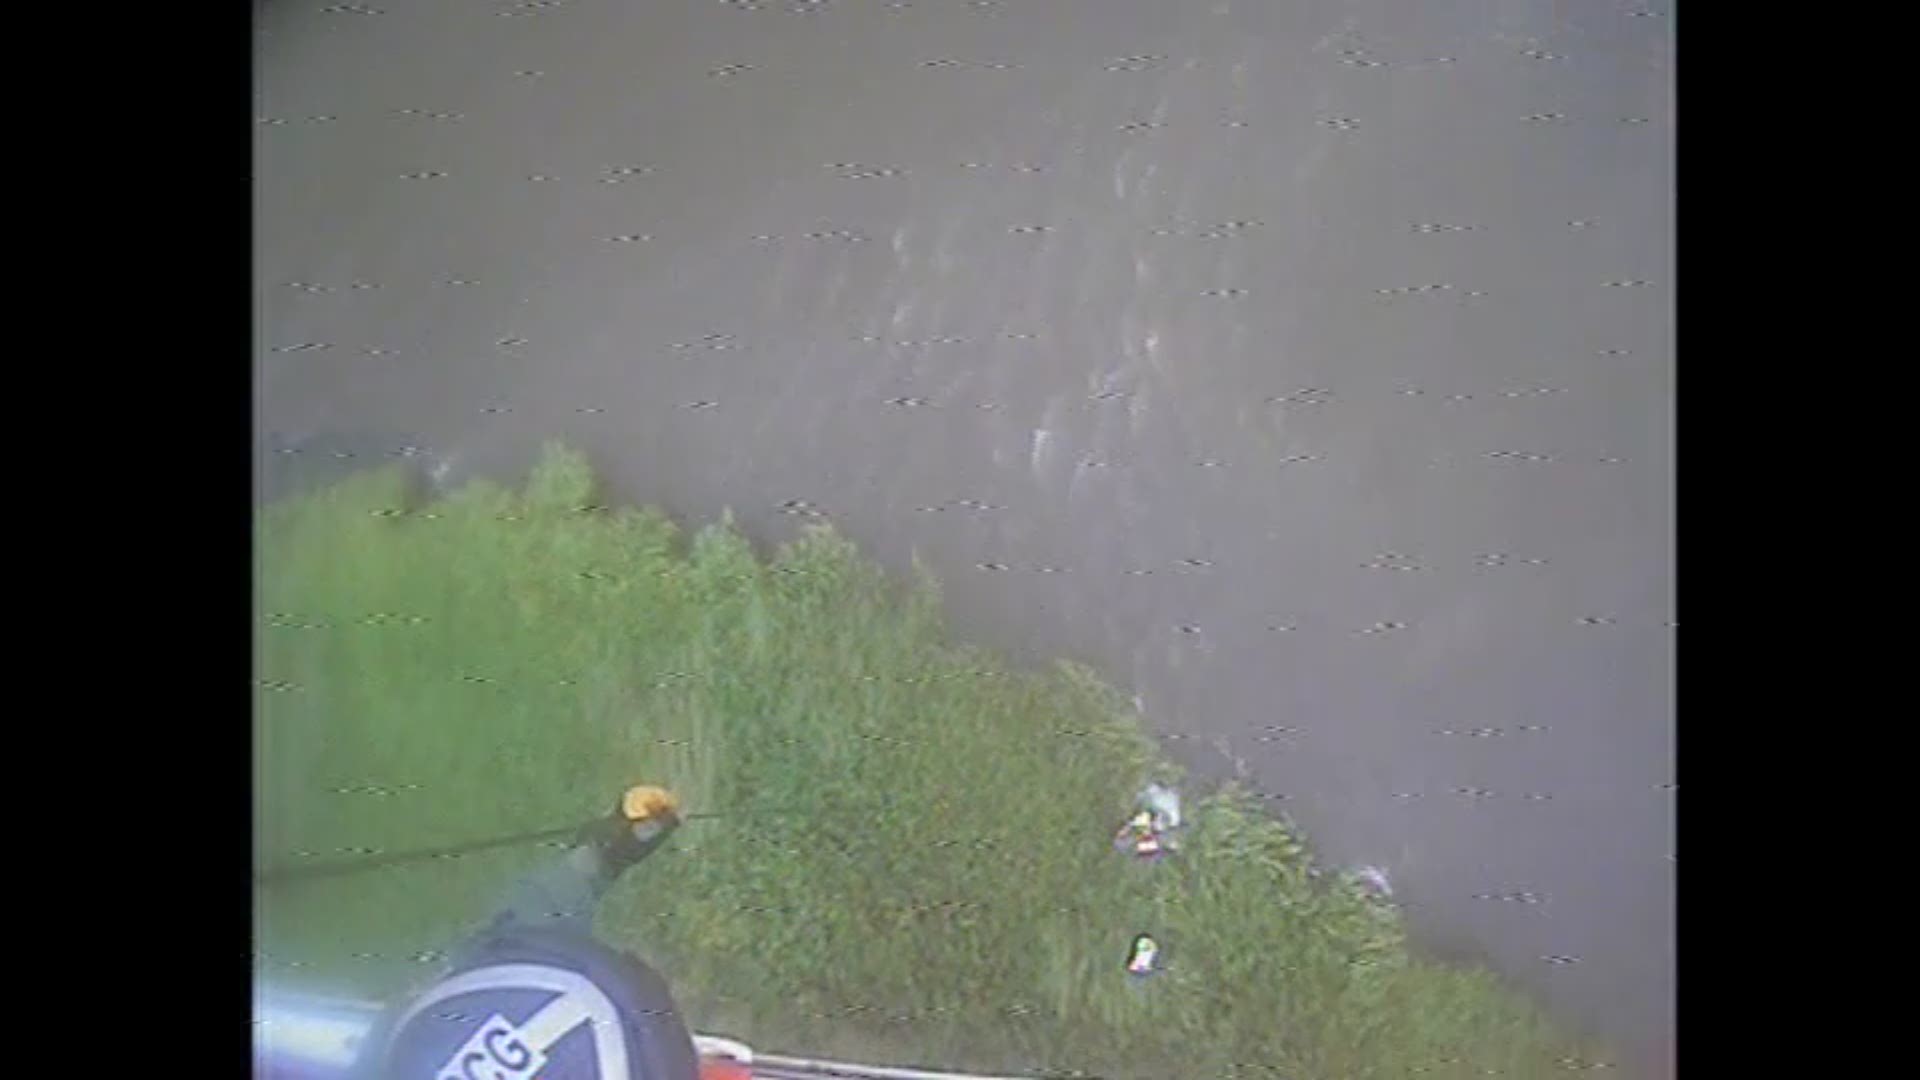 A Coast Guard Air Station New Orleans MH-65 Dolphin Helicopter aircrew rescues a man following a seaplane crash in Chandeleur Sound, approximately 25 miles west of the Chandeleur Islands, Louisiana, August 18, 2019.